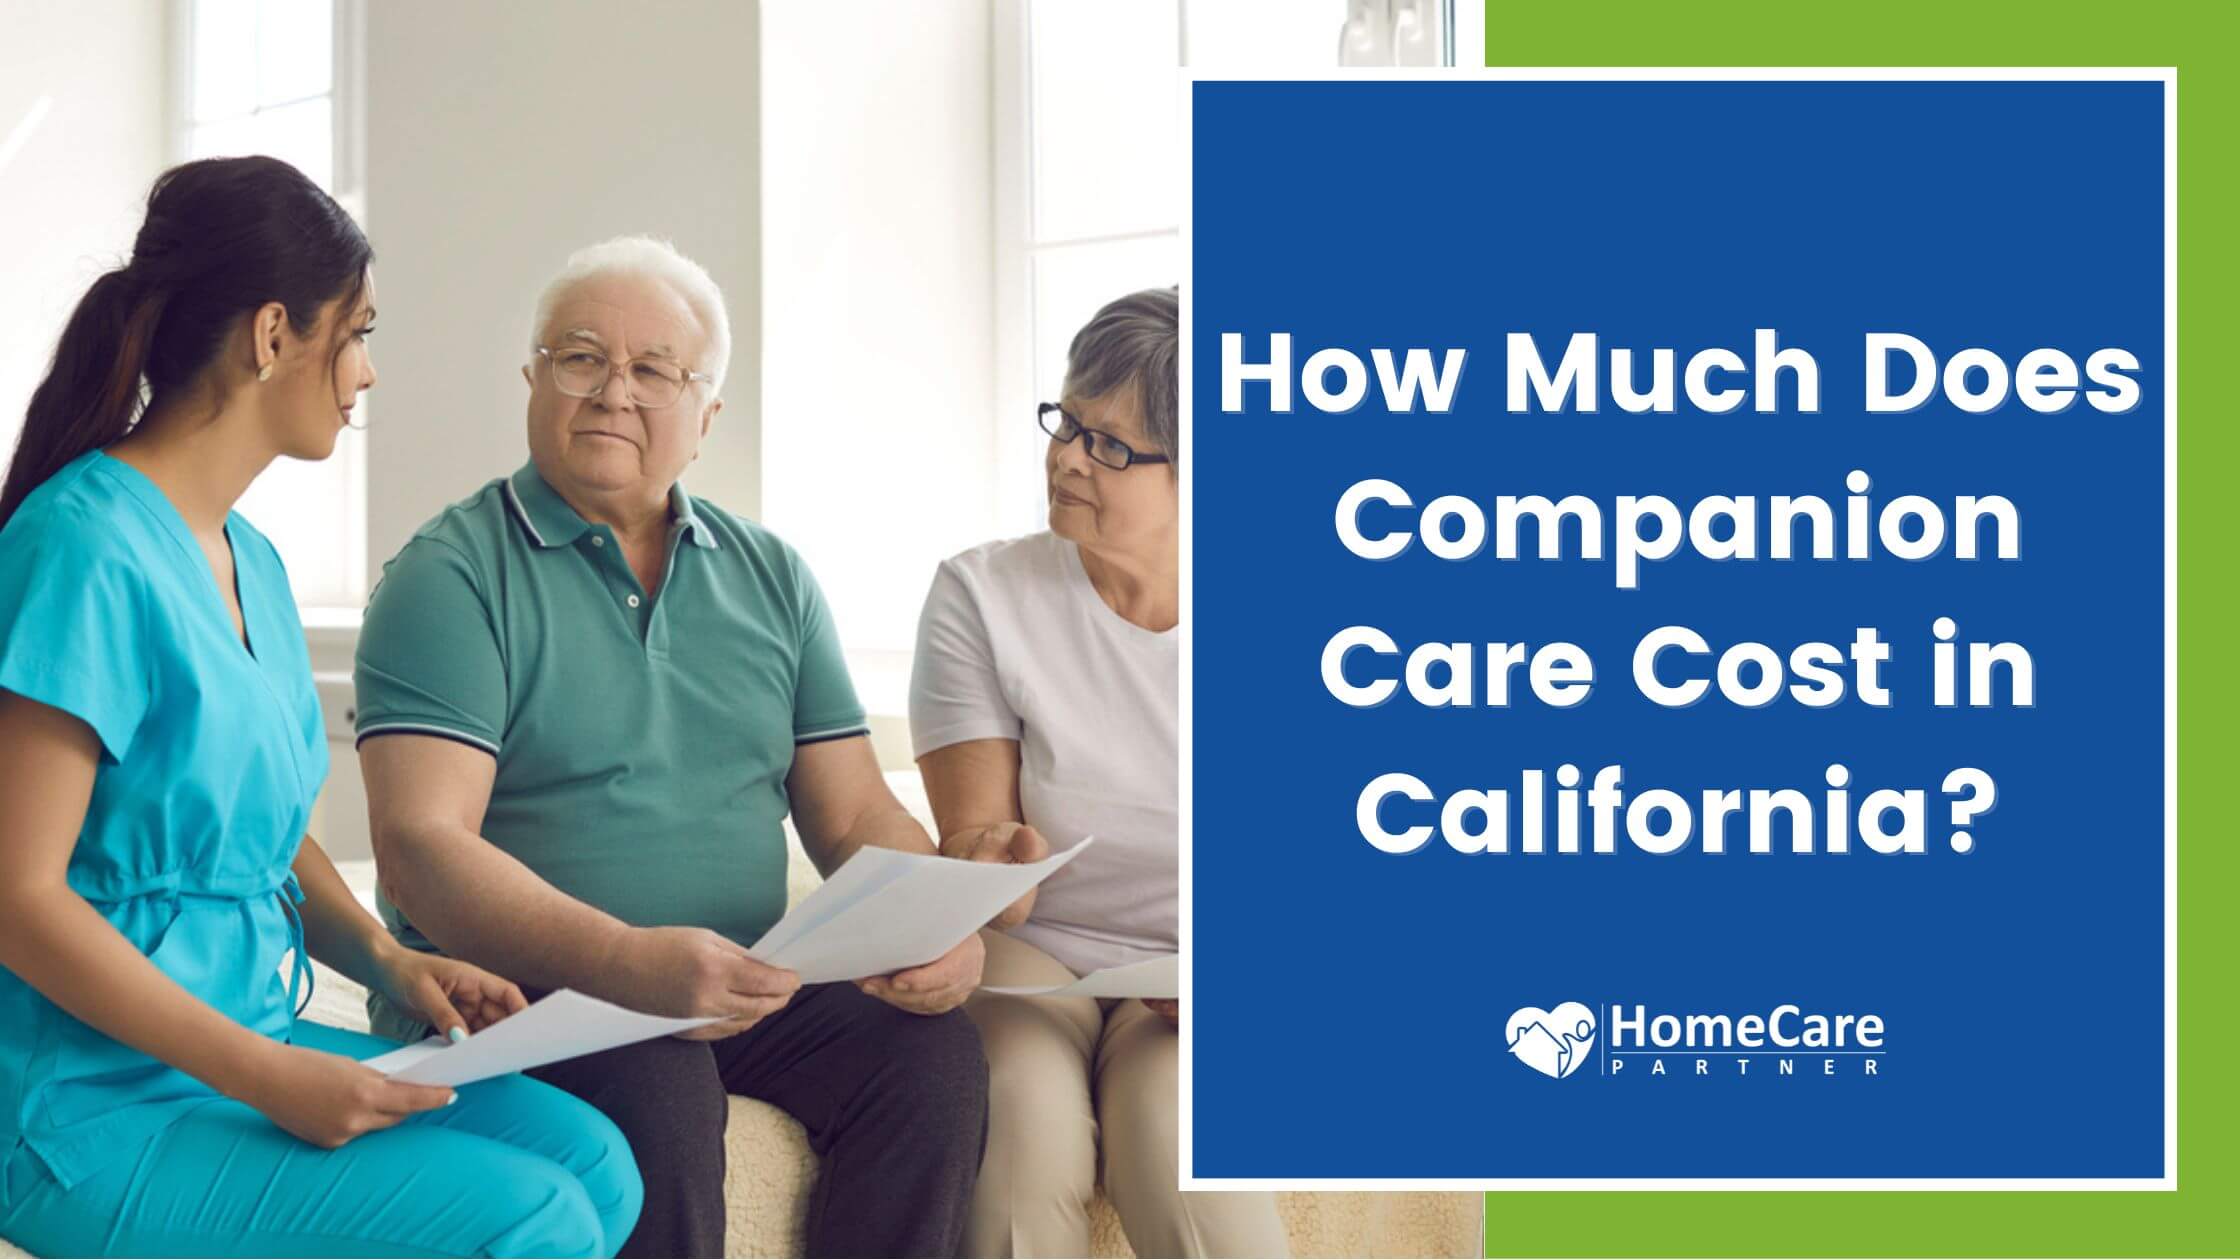 How Much Does Companion Care Cost in California?